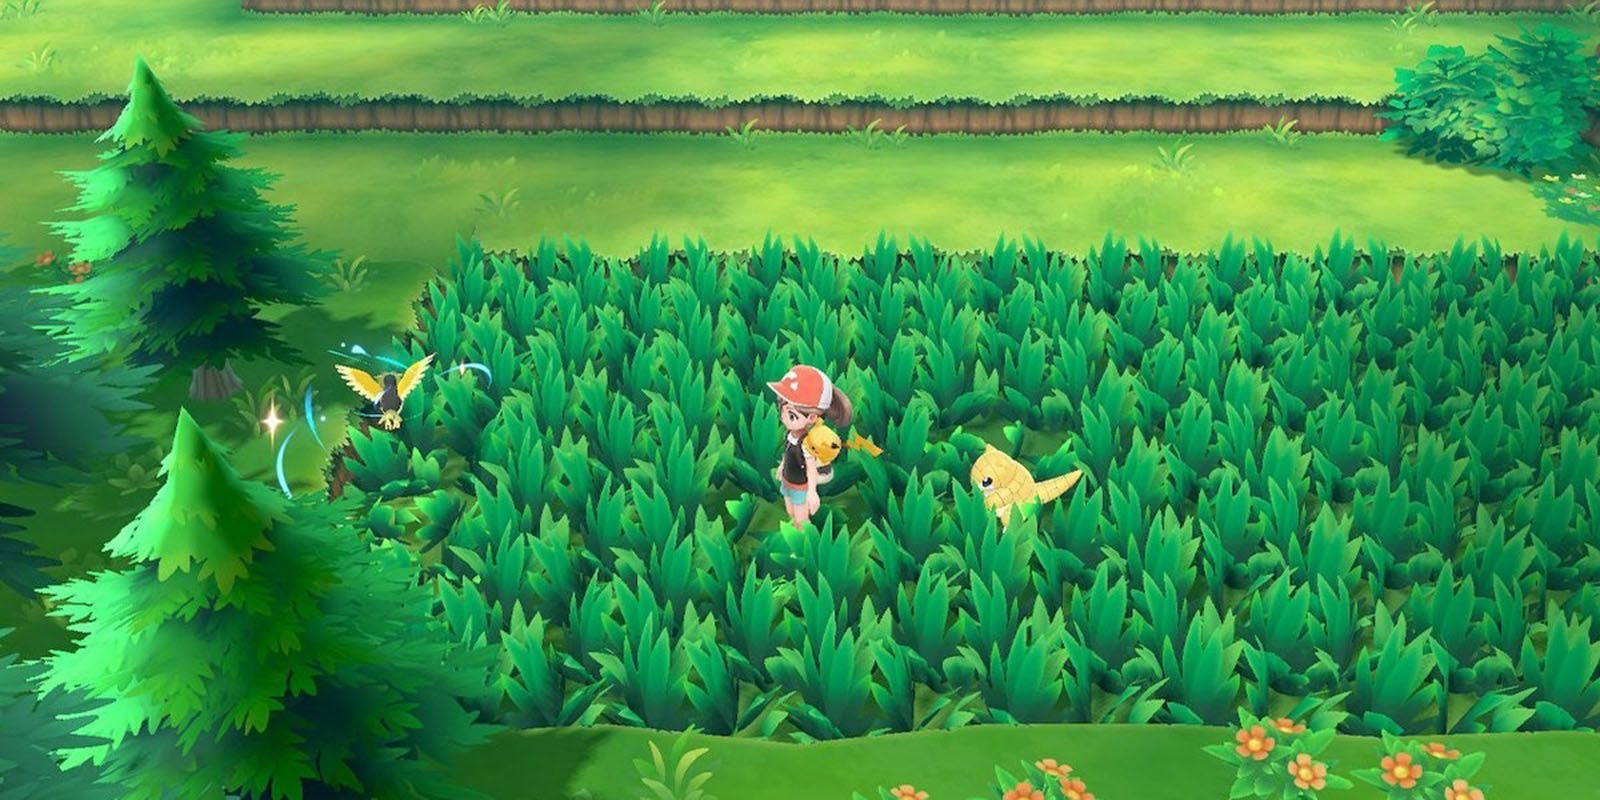 From Pokemon to Elden Ring Gamings Obsession With Tall Grass Explained